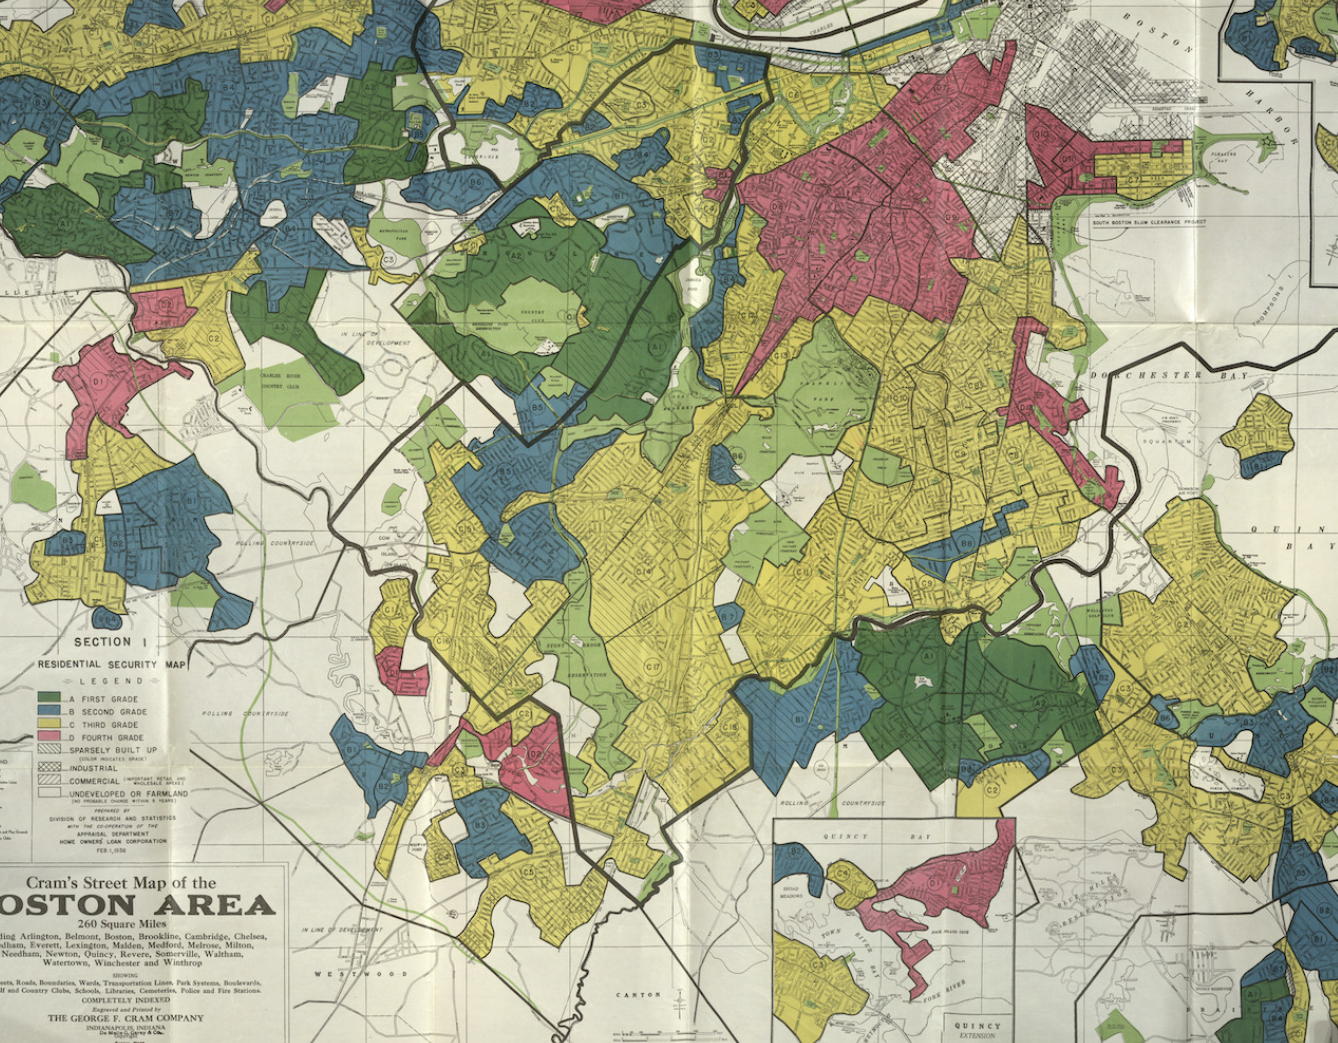 Historical colored map of the Boston area, illustrating various neighborhoods and street layouts, with a legend and marks highlighting areas affected by environmental racism.